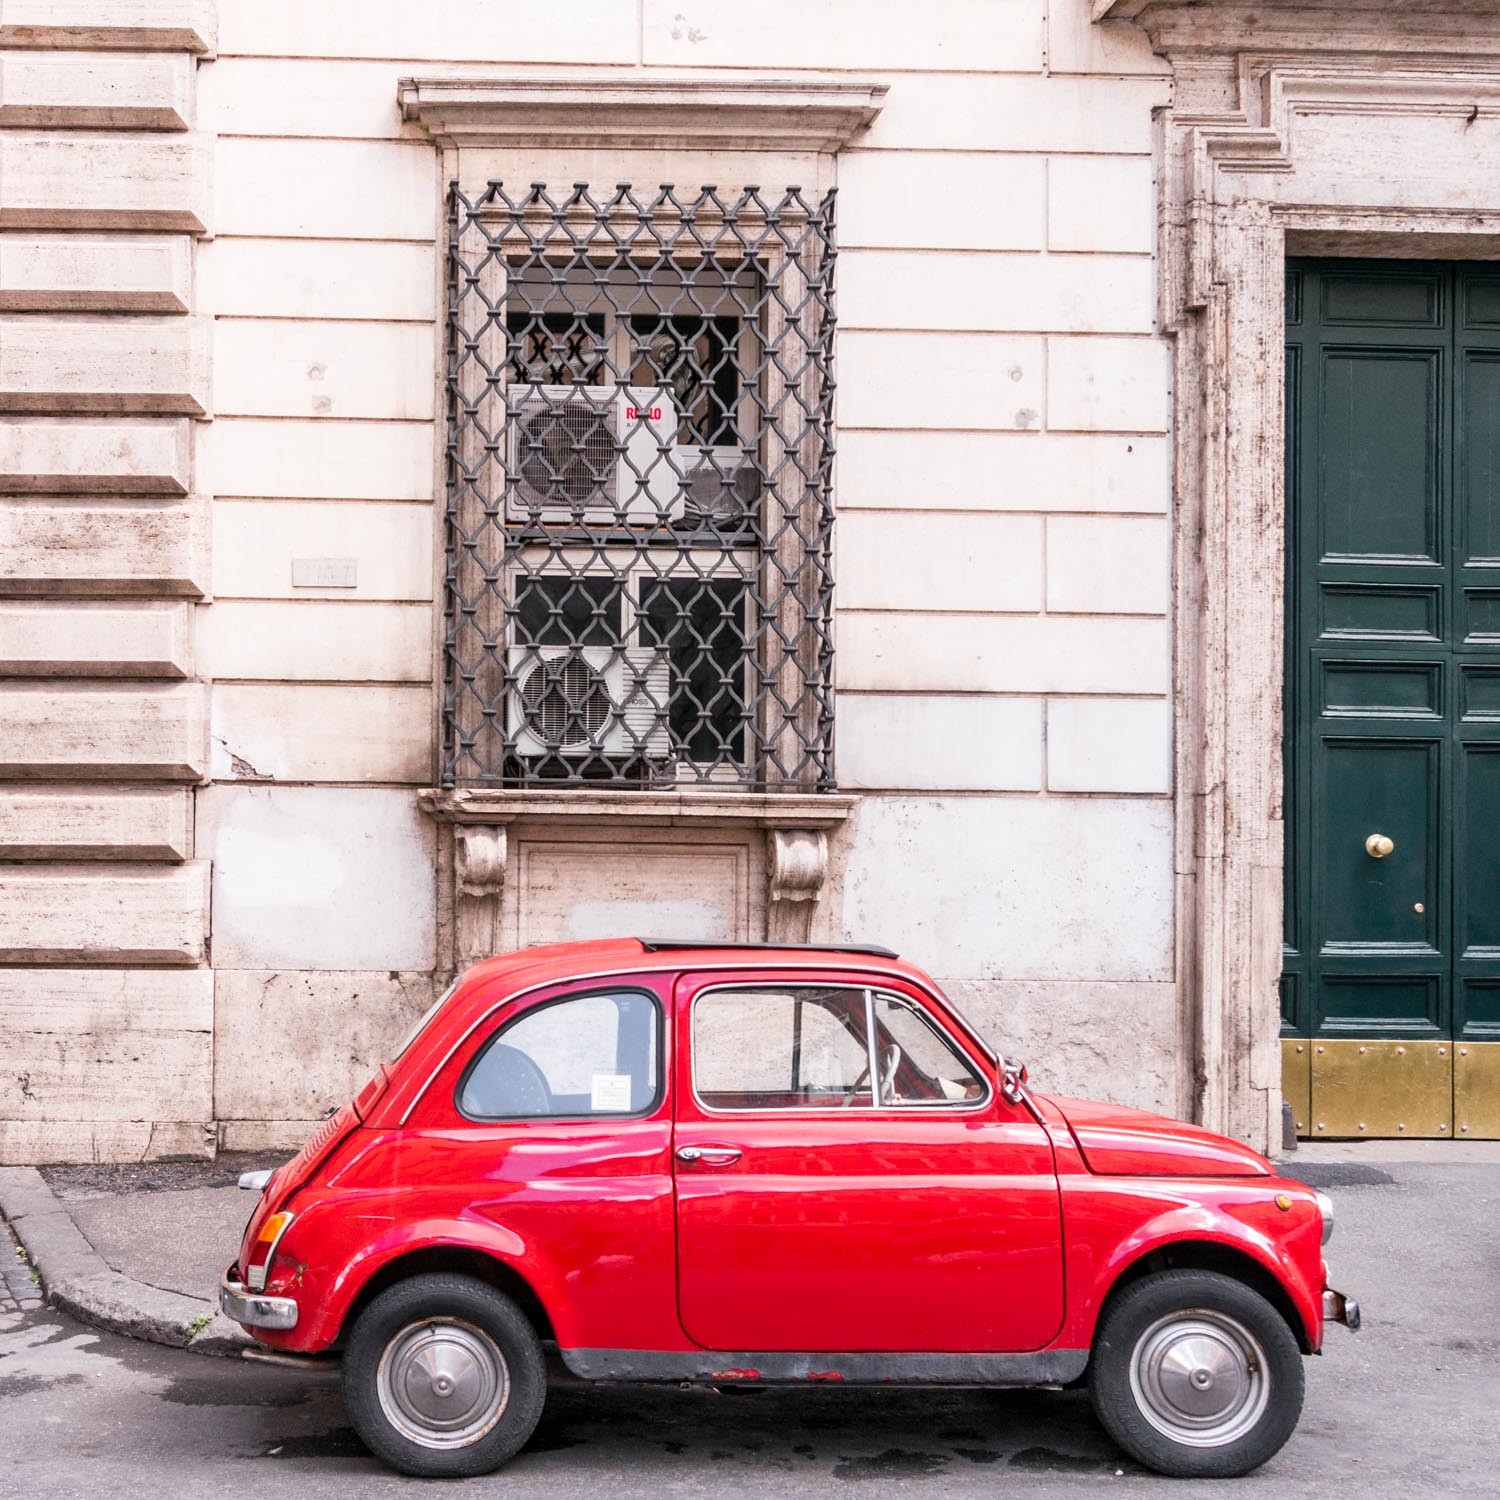 Rome long weekend – Fiat 500’s of Rome